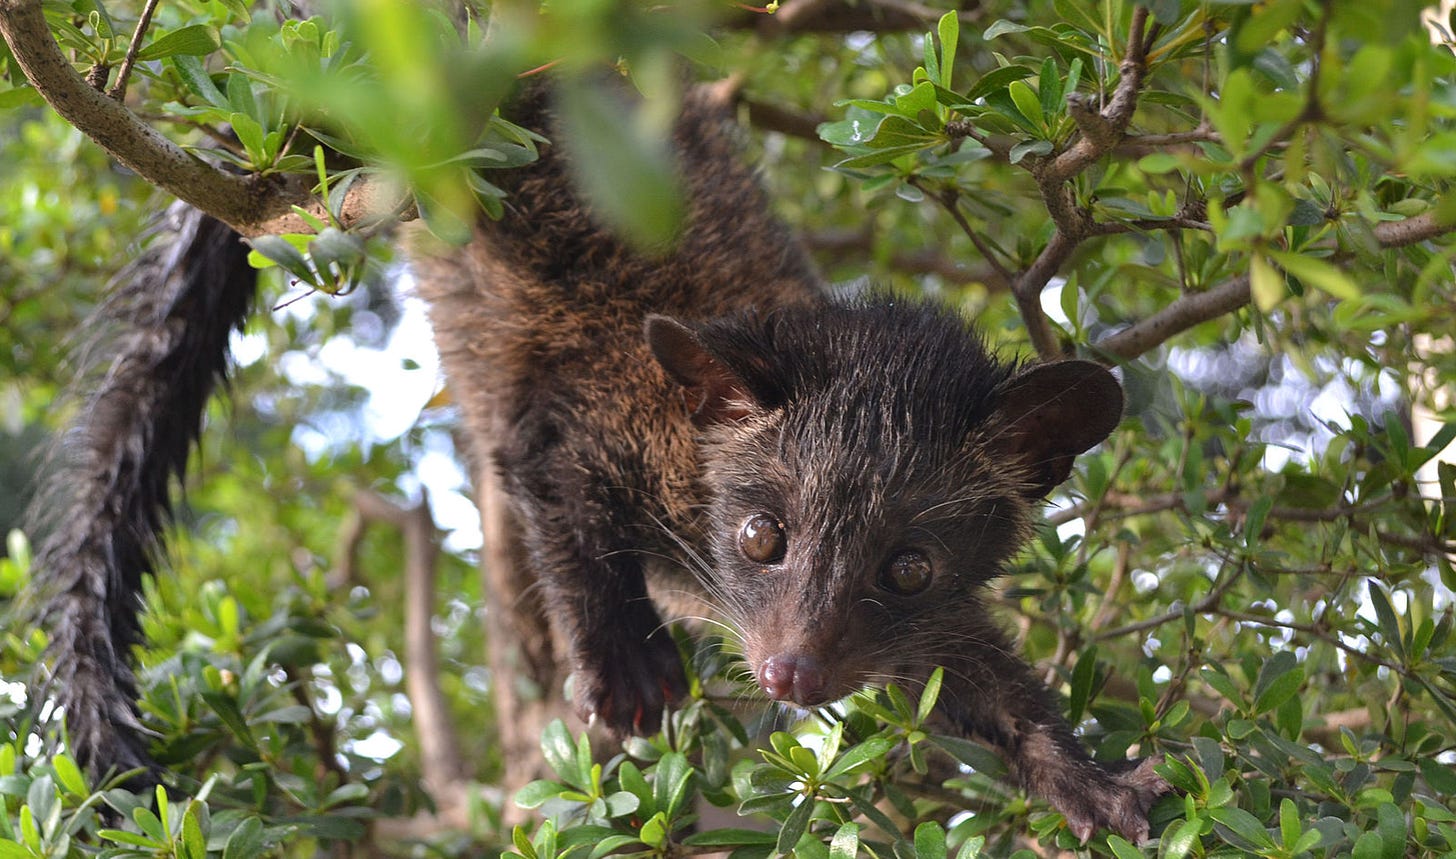 A Civet Cat stares out from the branches of a tree. It a reddish-brown cat with a pointed rat like face, and long tail wrapping around a tree branch.